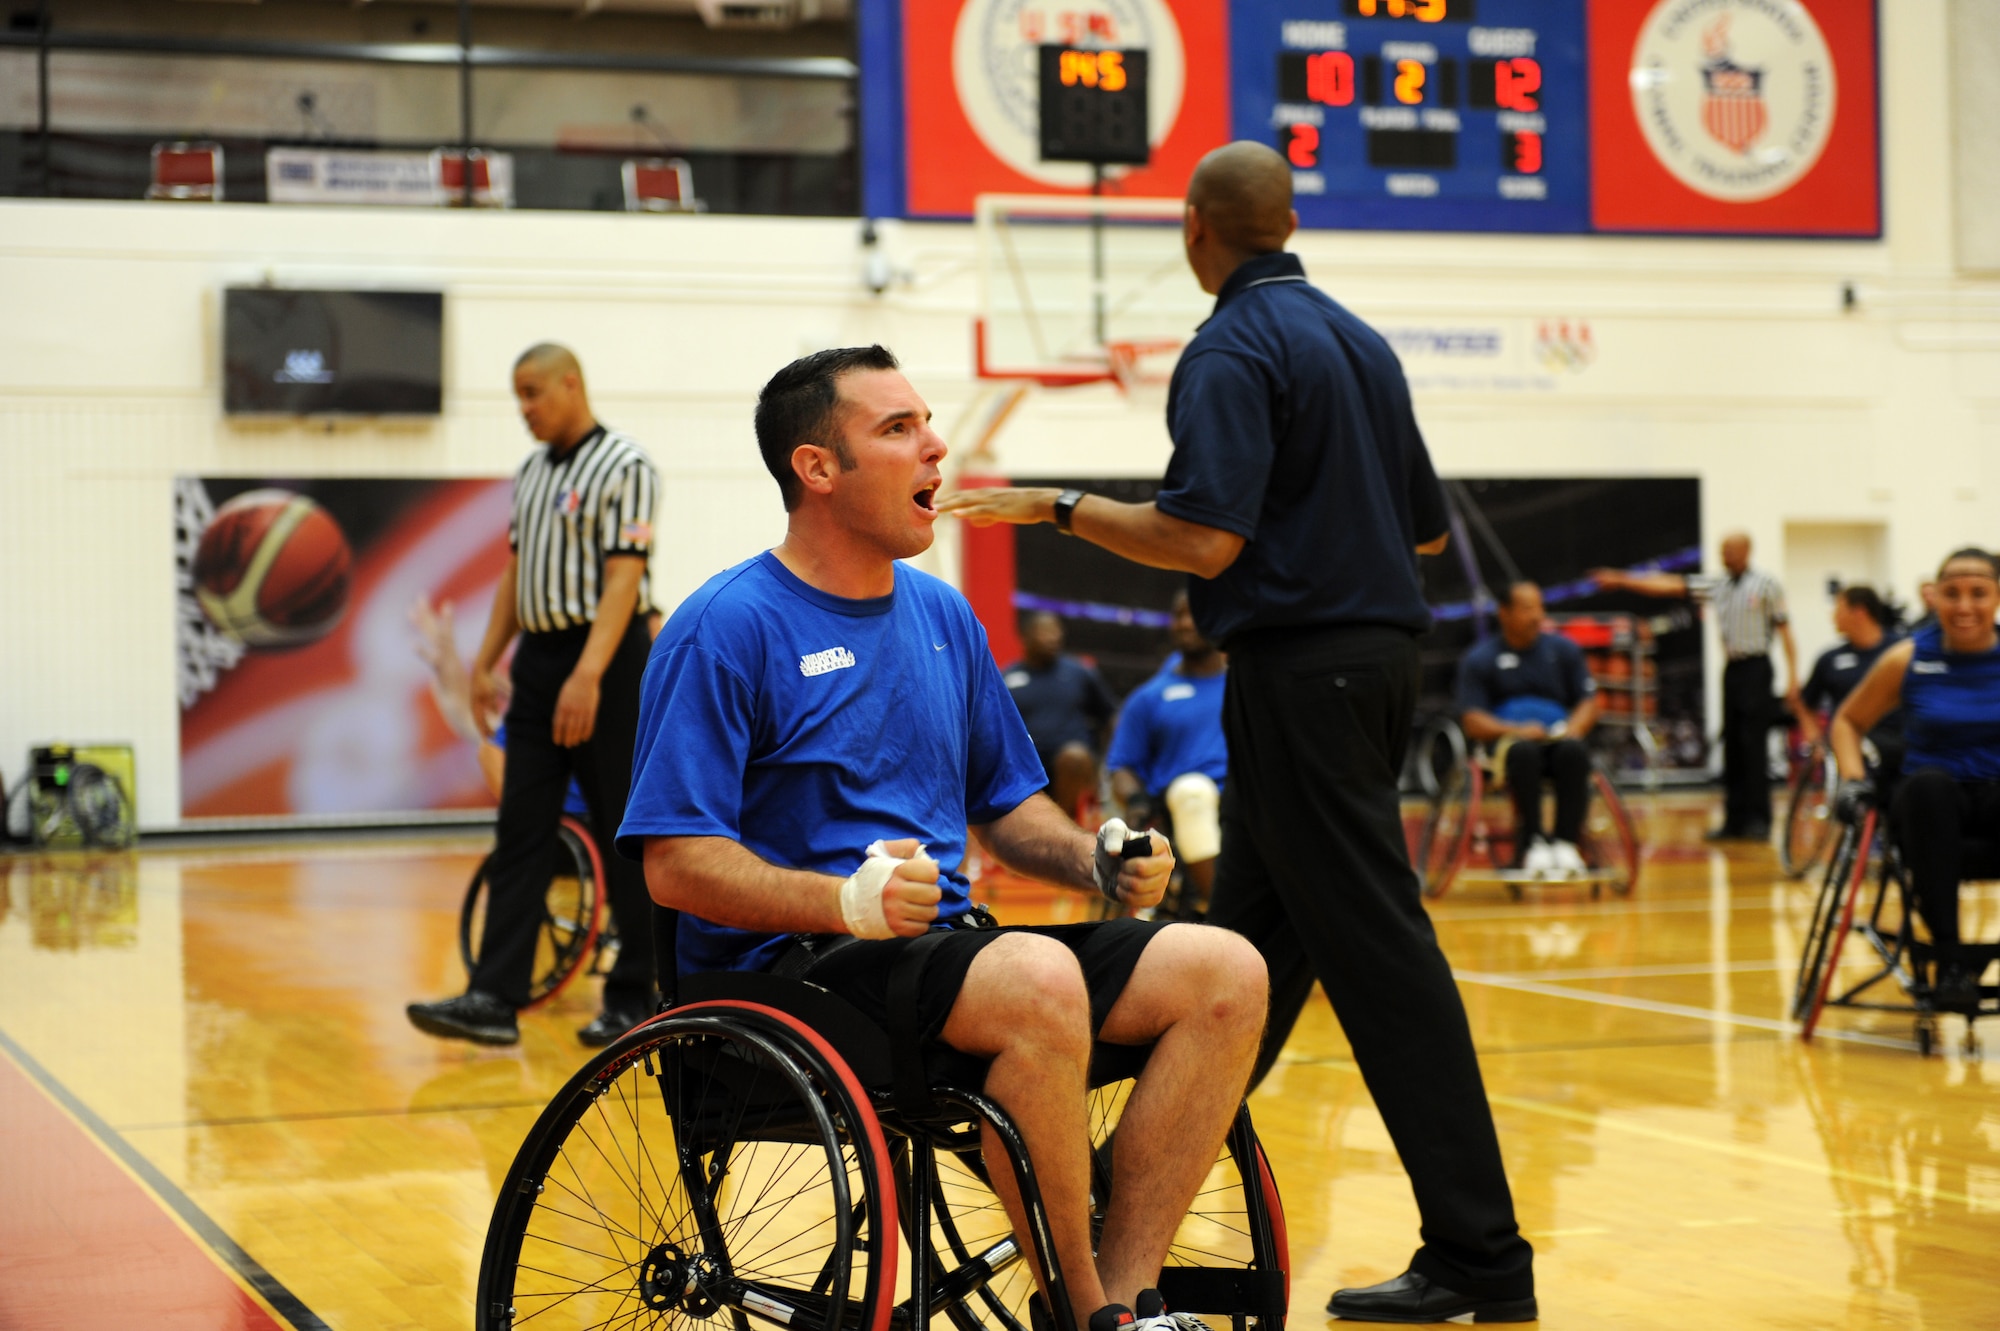 Christopher D'Angelo yells after making a point in a basketball game during the Warrior Games bronze medal match against the Navy May 12, 2010 at the Olympic Training Center, Colorado Springs. The Air Force went on to win the game 13-10. The Warrior Games competition began May 10 and finishes on May 14, 2010 at the U.S. Olympic Training Center in Colorado Springs. (U.S. Air Force photo/Staff Sgt. Desiree N. Palacios)